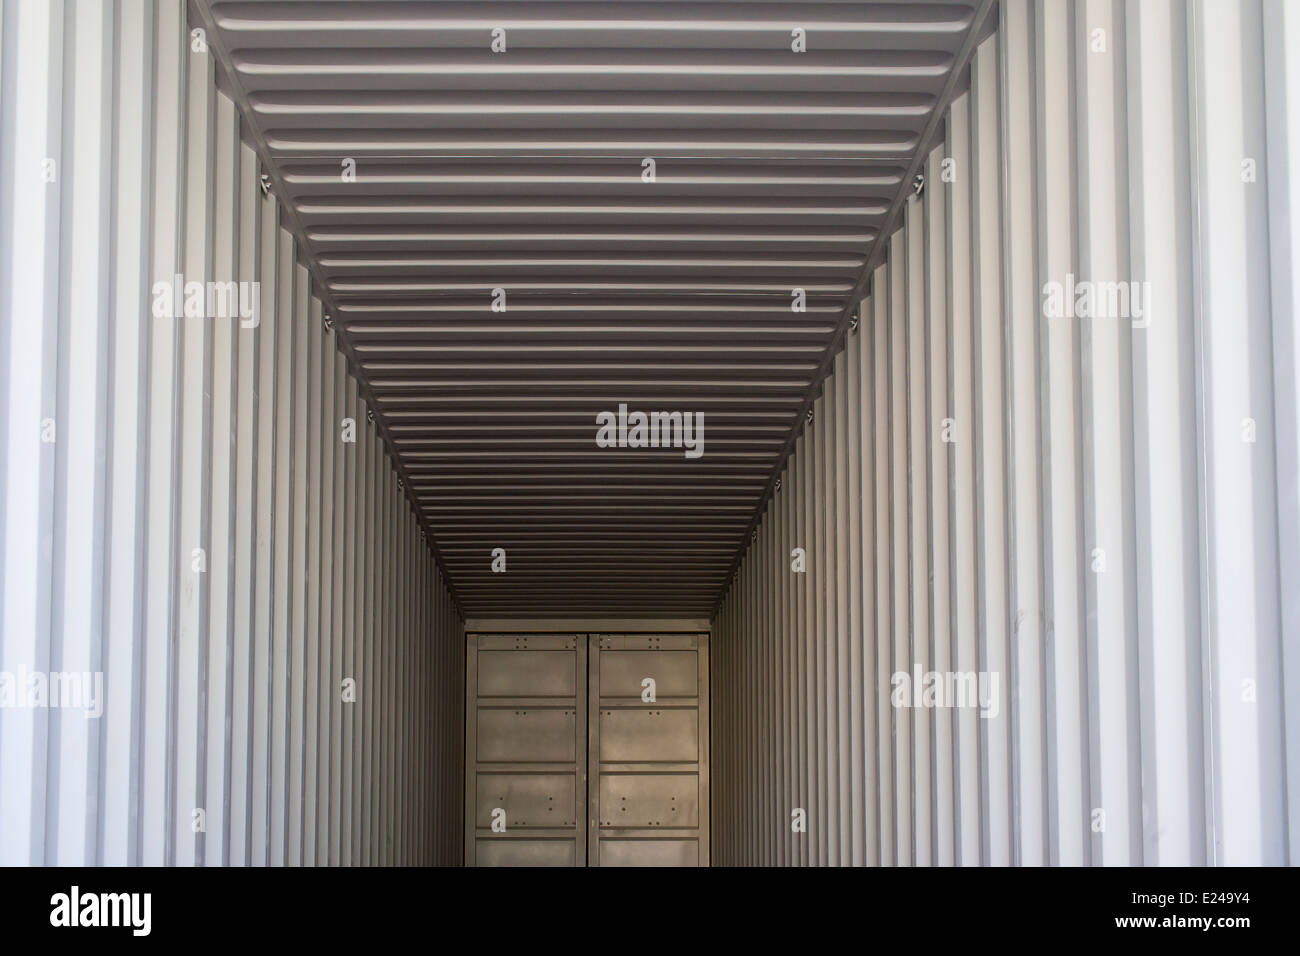 A symmetrical image of the interior of a standard cargo shipping container. The floor is covered with protective paper. Stock Photo